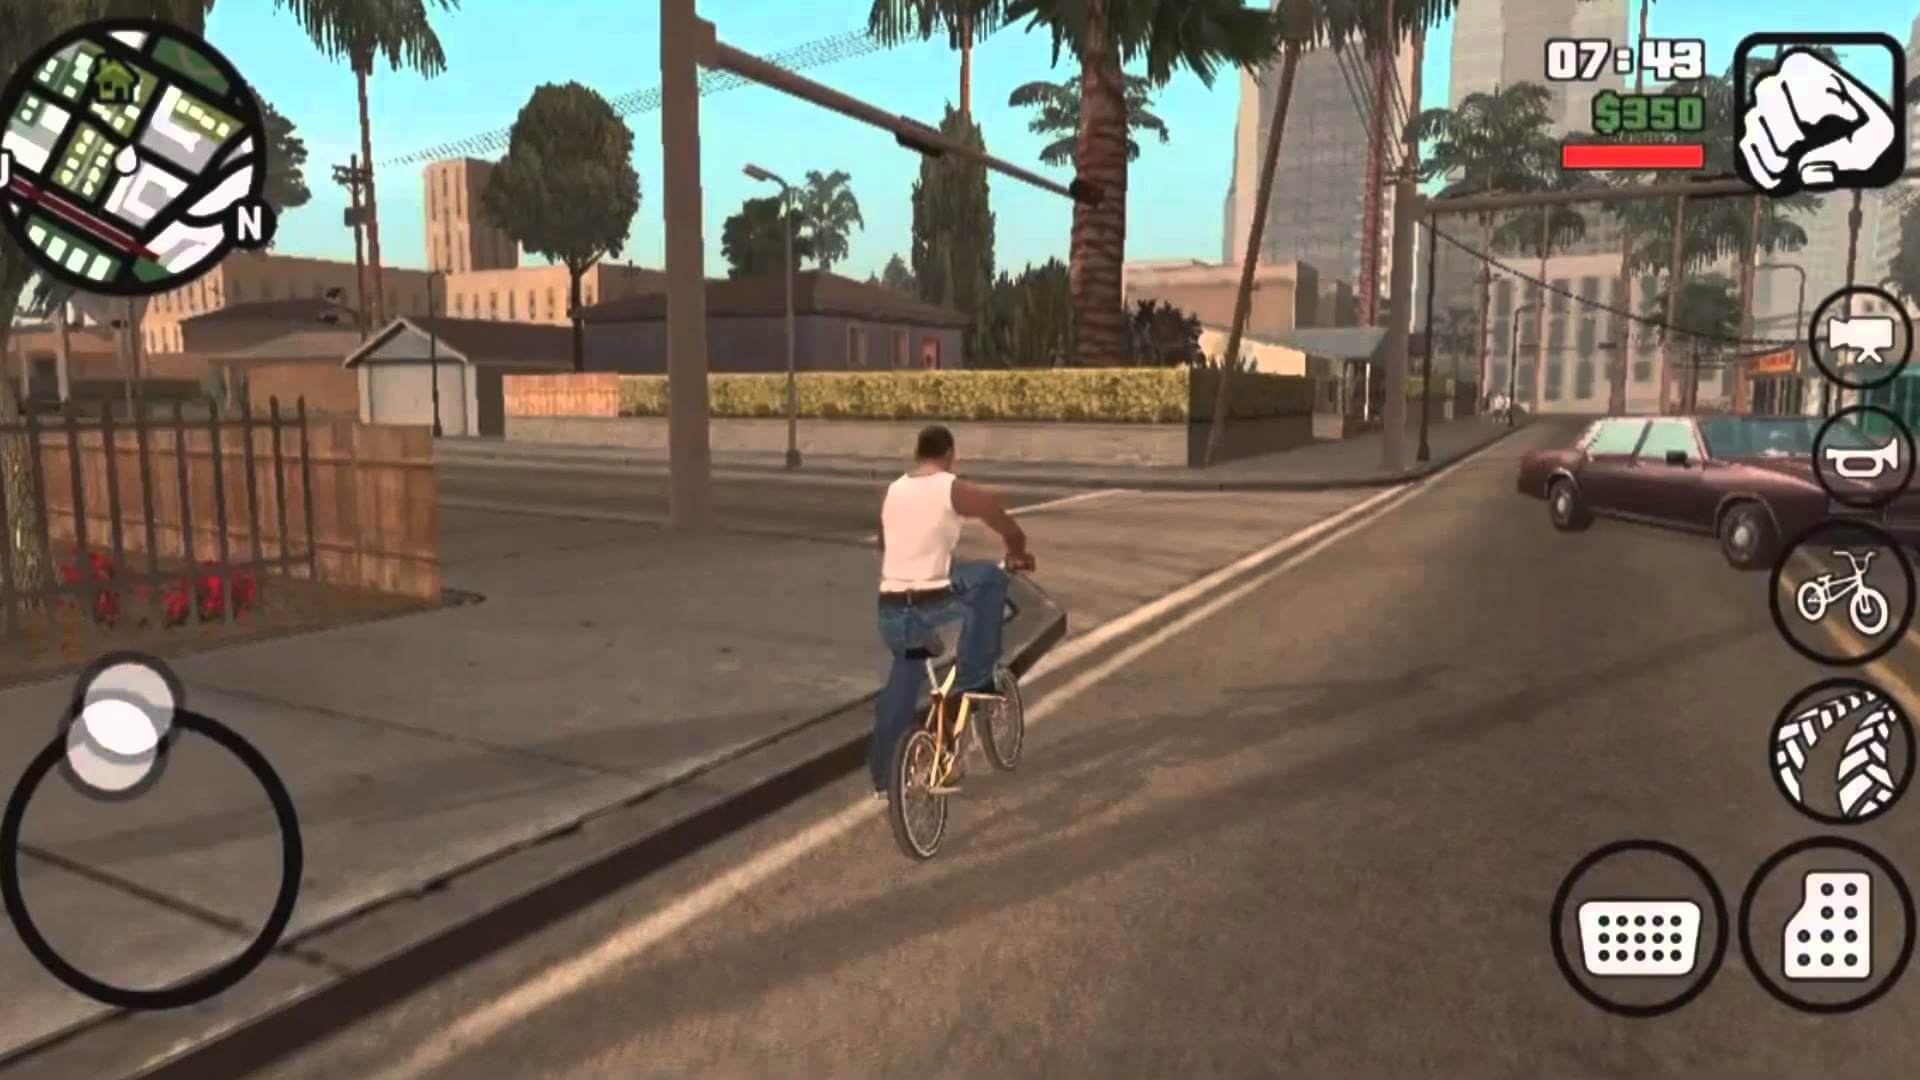 Gta san andreas mods download and install pc